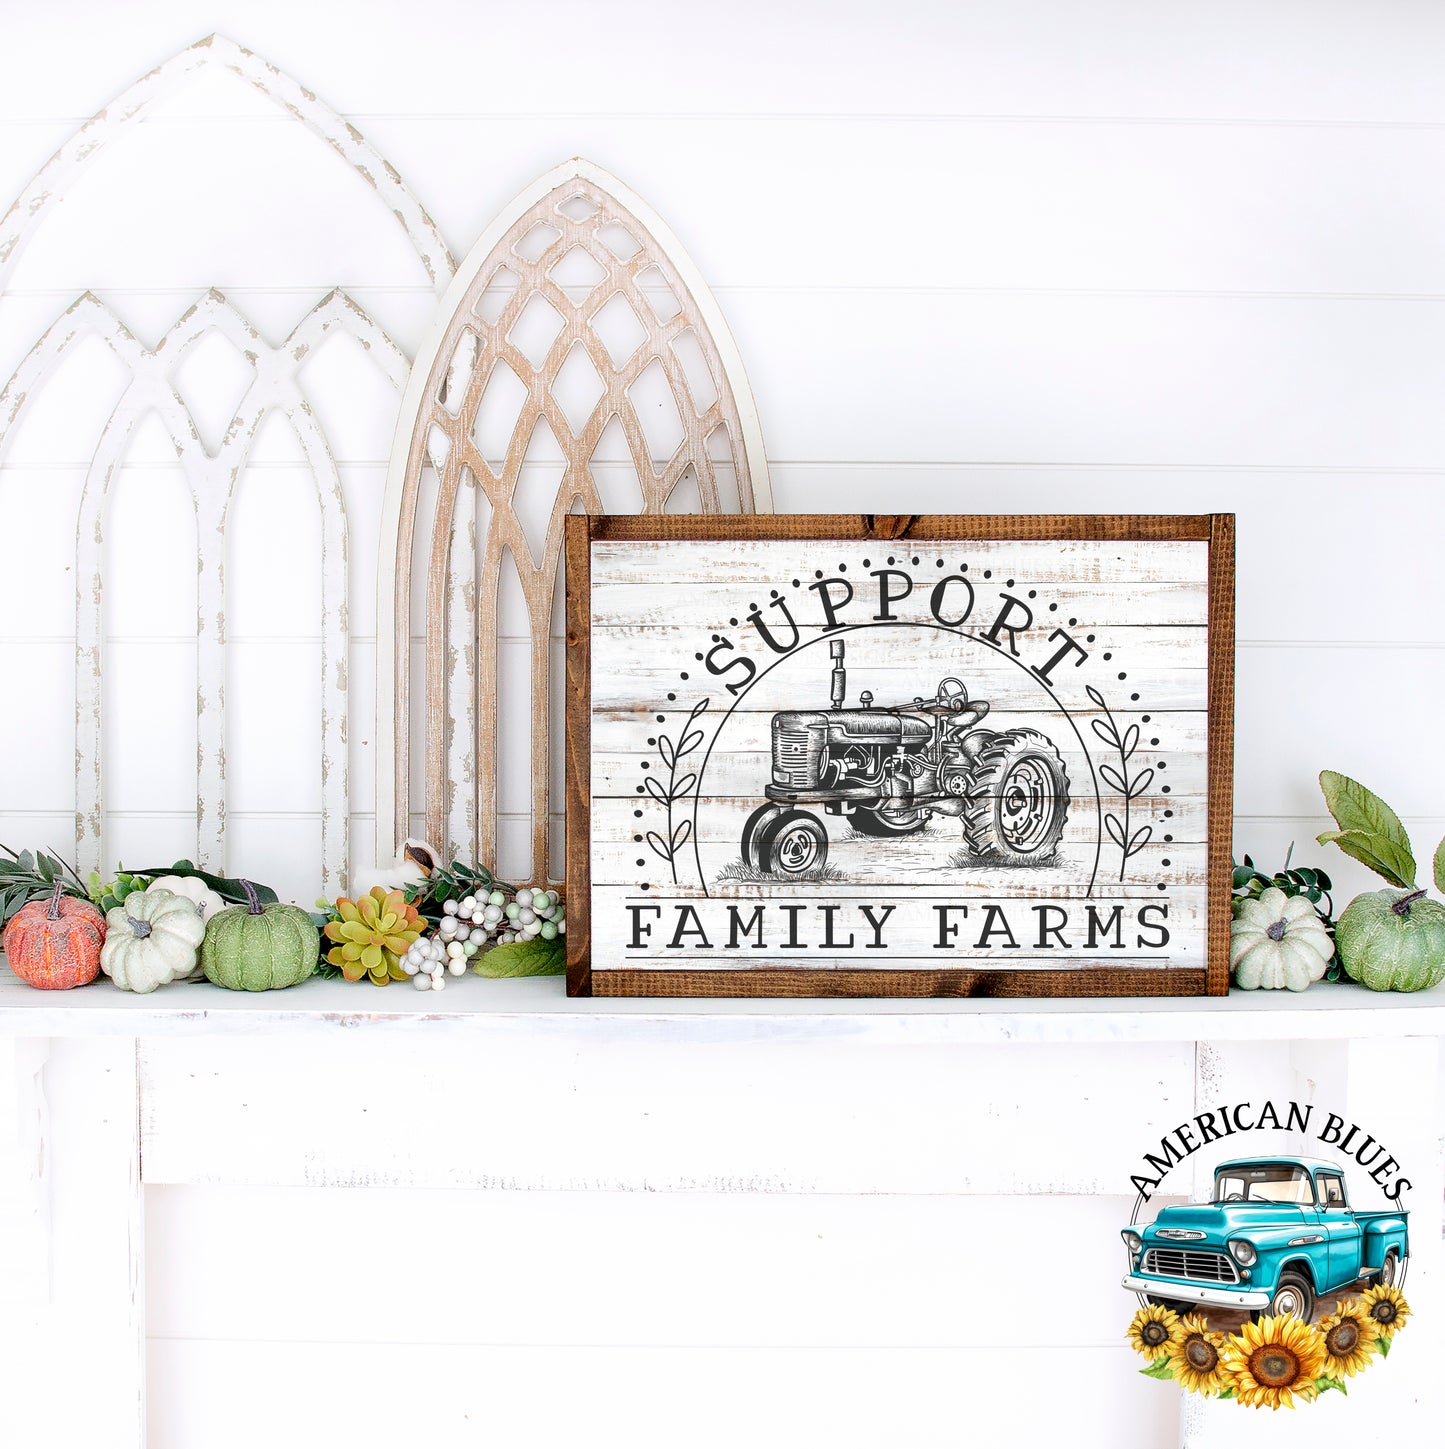 Support Family Farms printable art | American Blues Designs